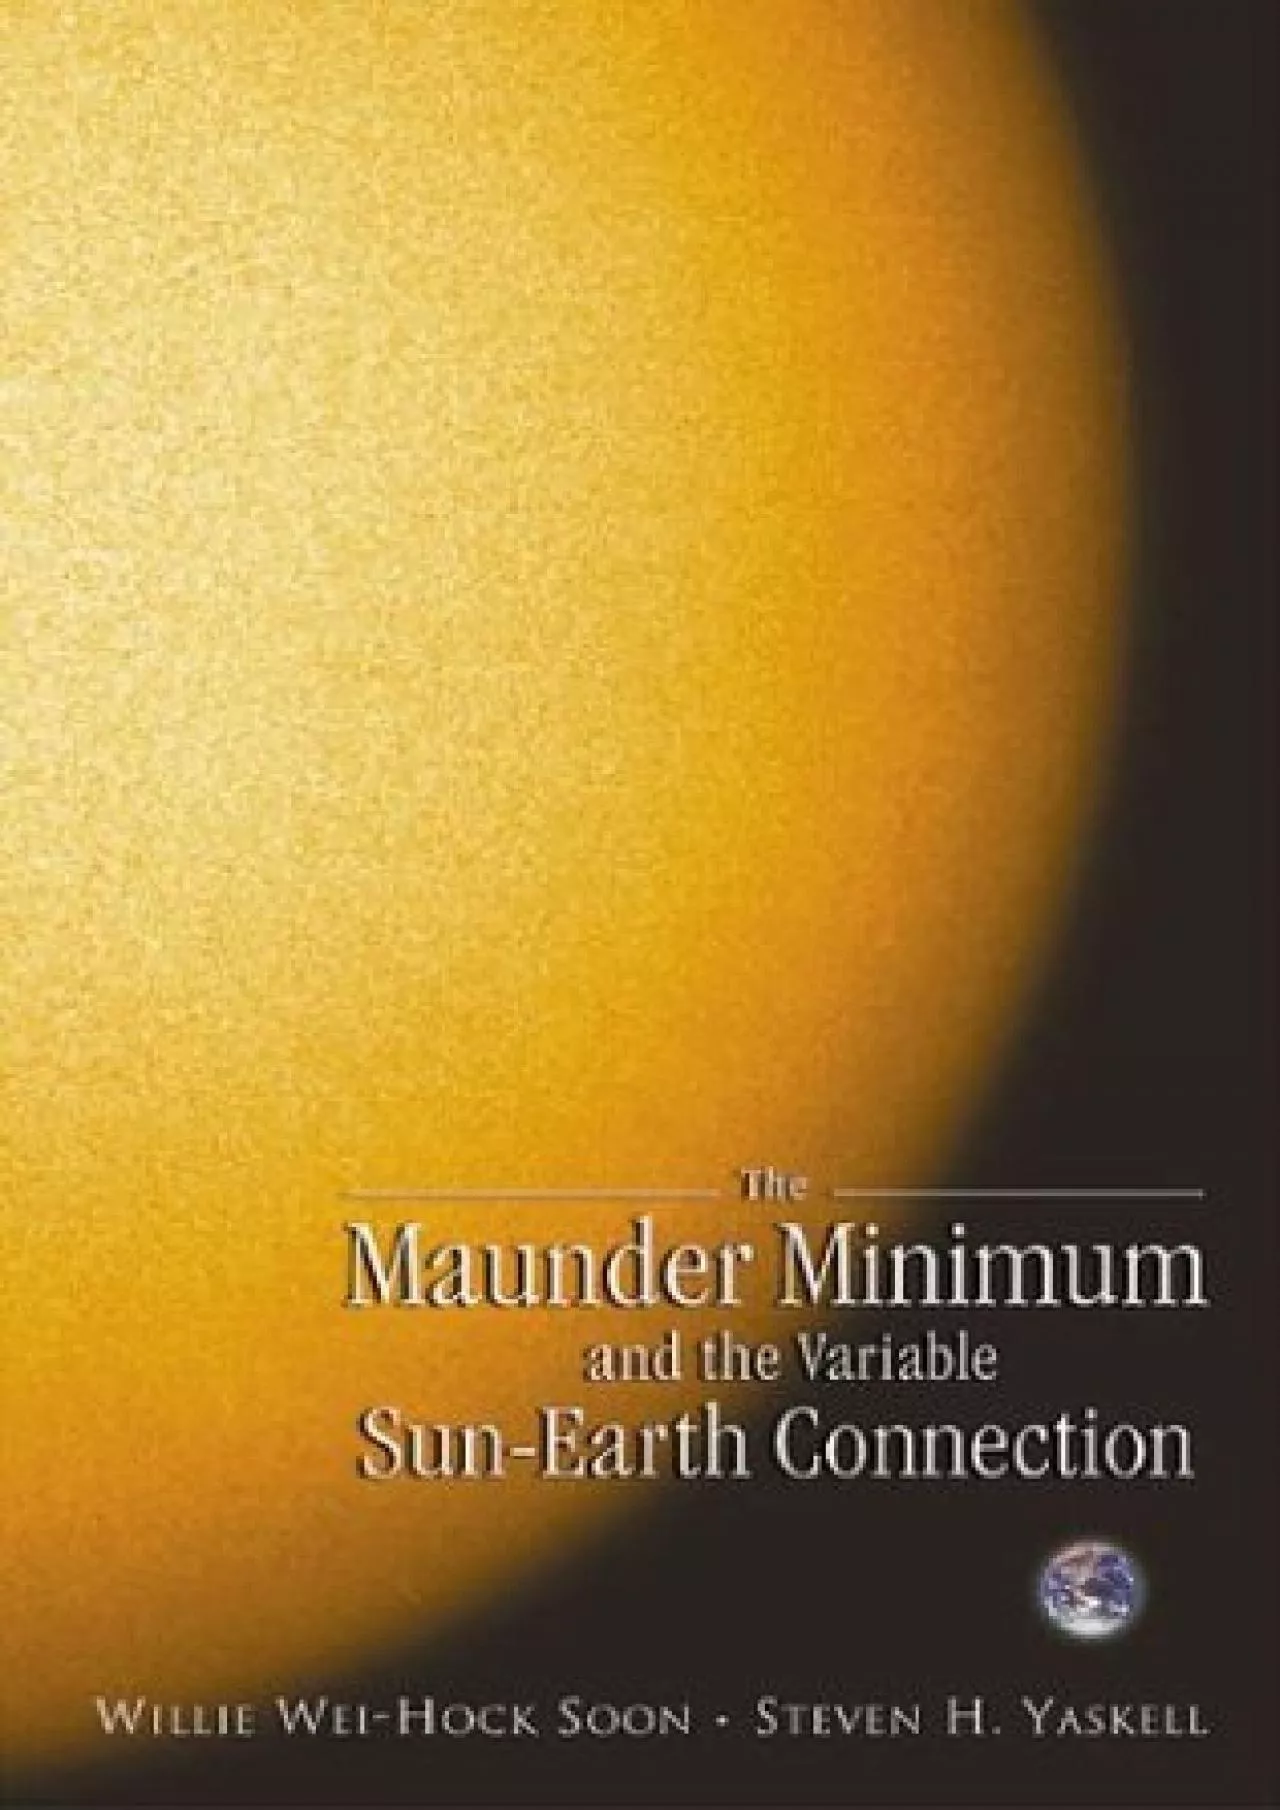 (DOWNLOAD)-The Maunder Minimum and the Variable Sun-Earth Connection